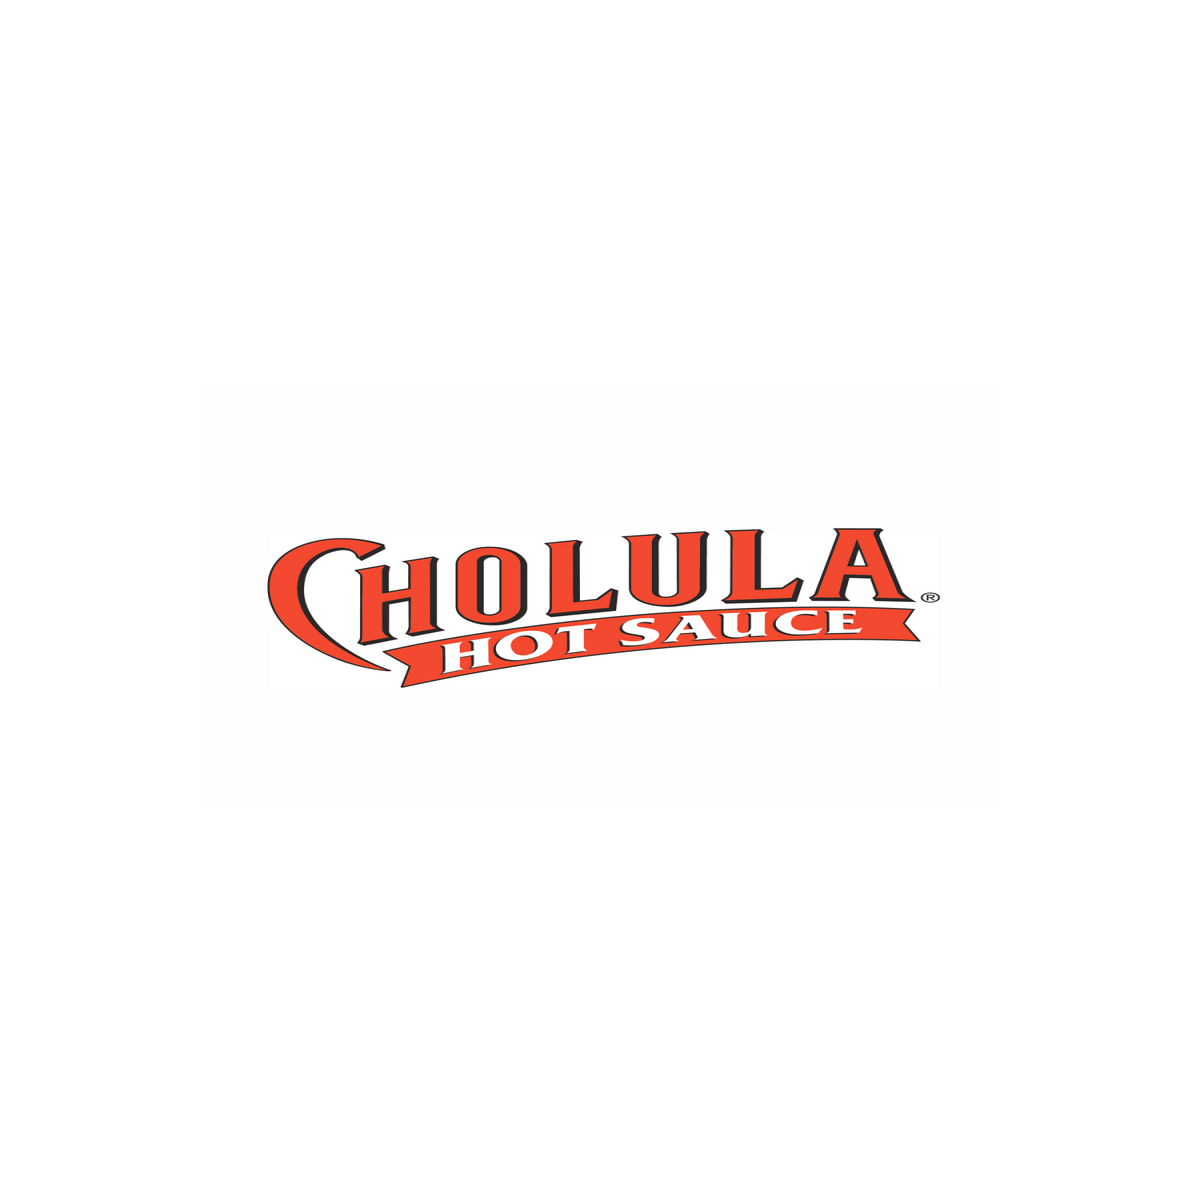 Where to Buy Cholula Online